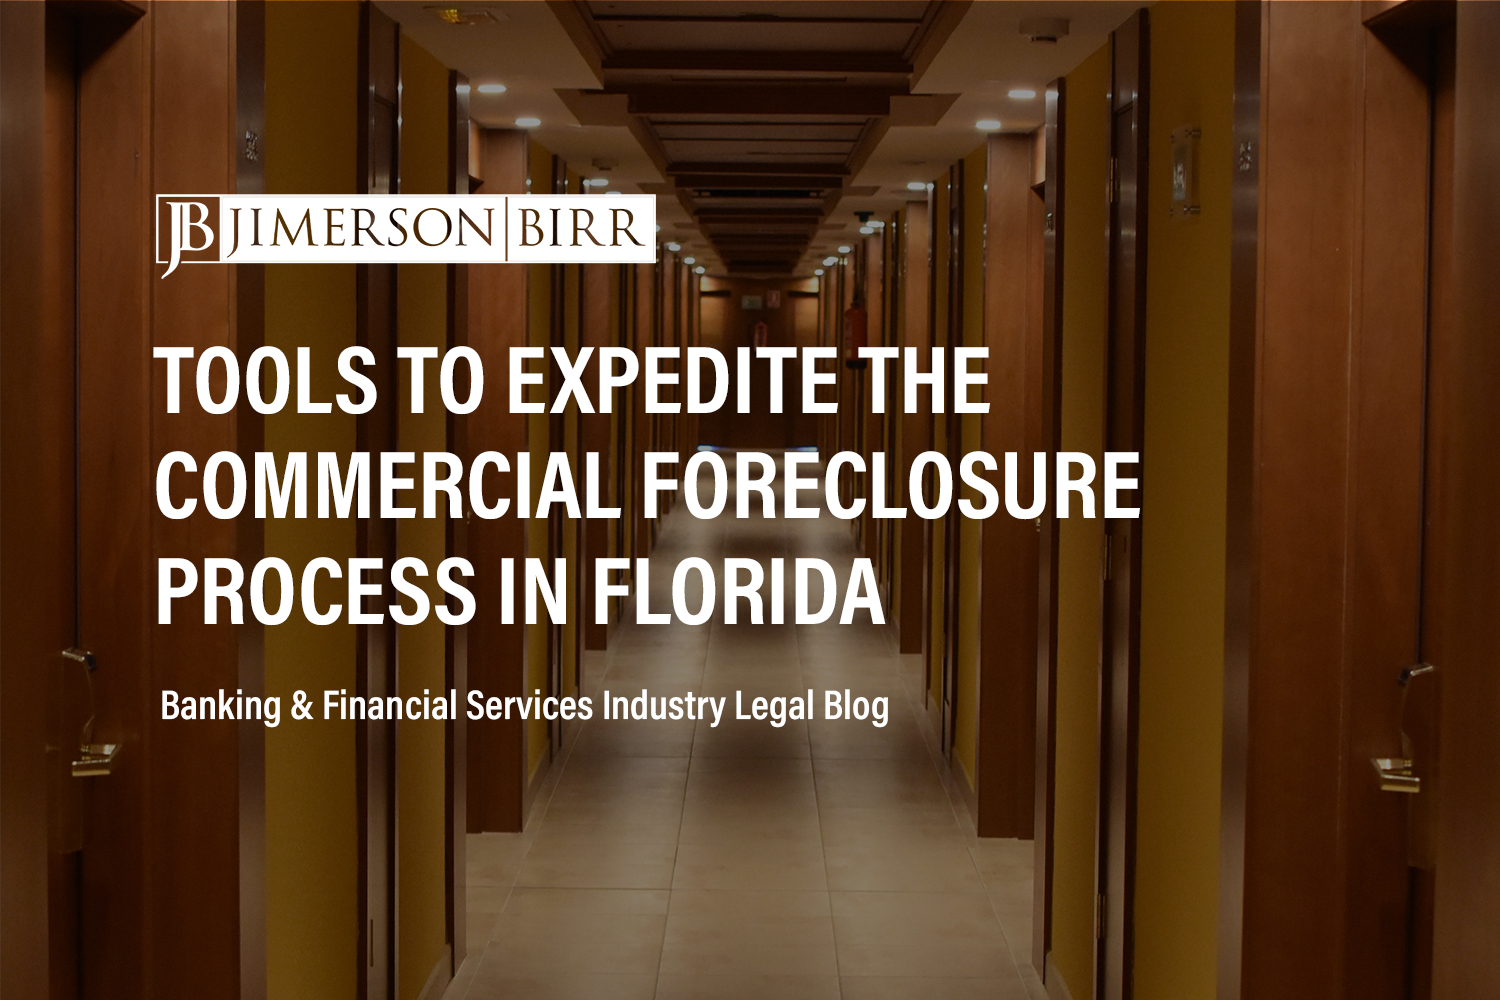 Mitigating Risks Associated with Hotel, Restaurant and Entertainment Industry Economic Challenges – Part 7: Expediting the Commercial Foreclosure Process Under Section 702.10, Florida Statutes